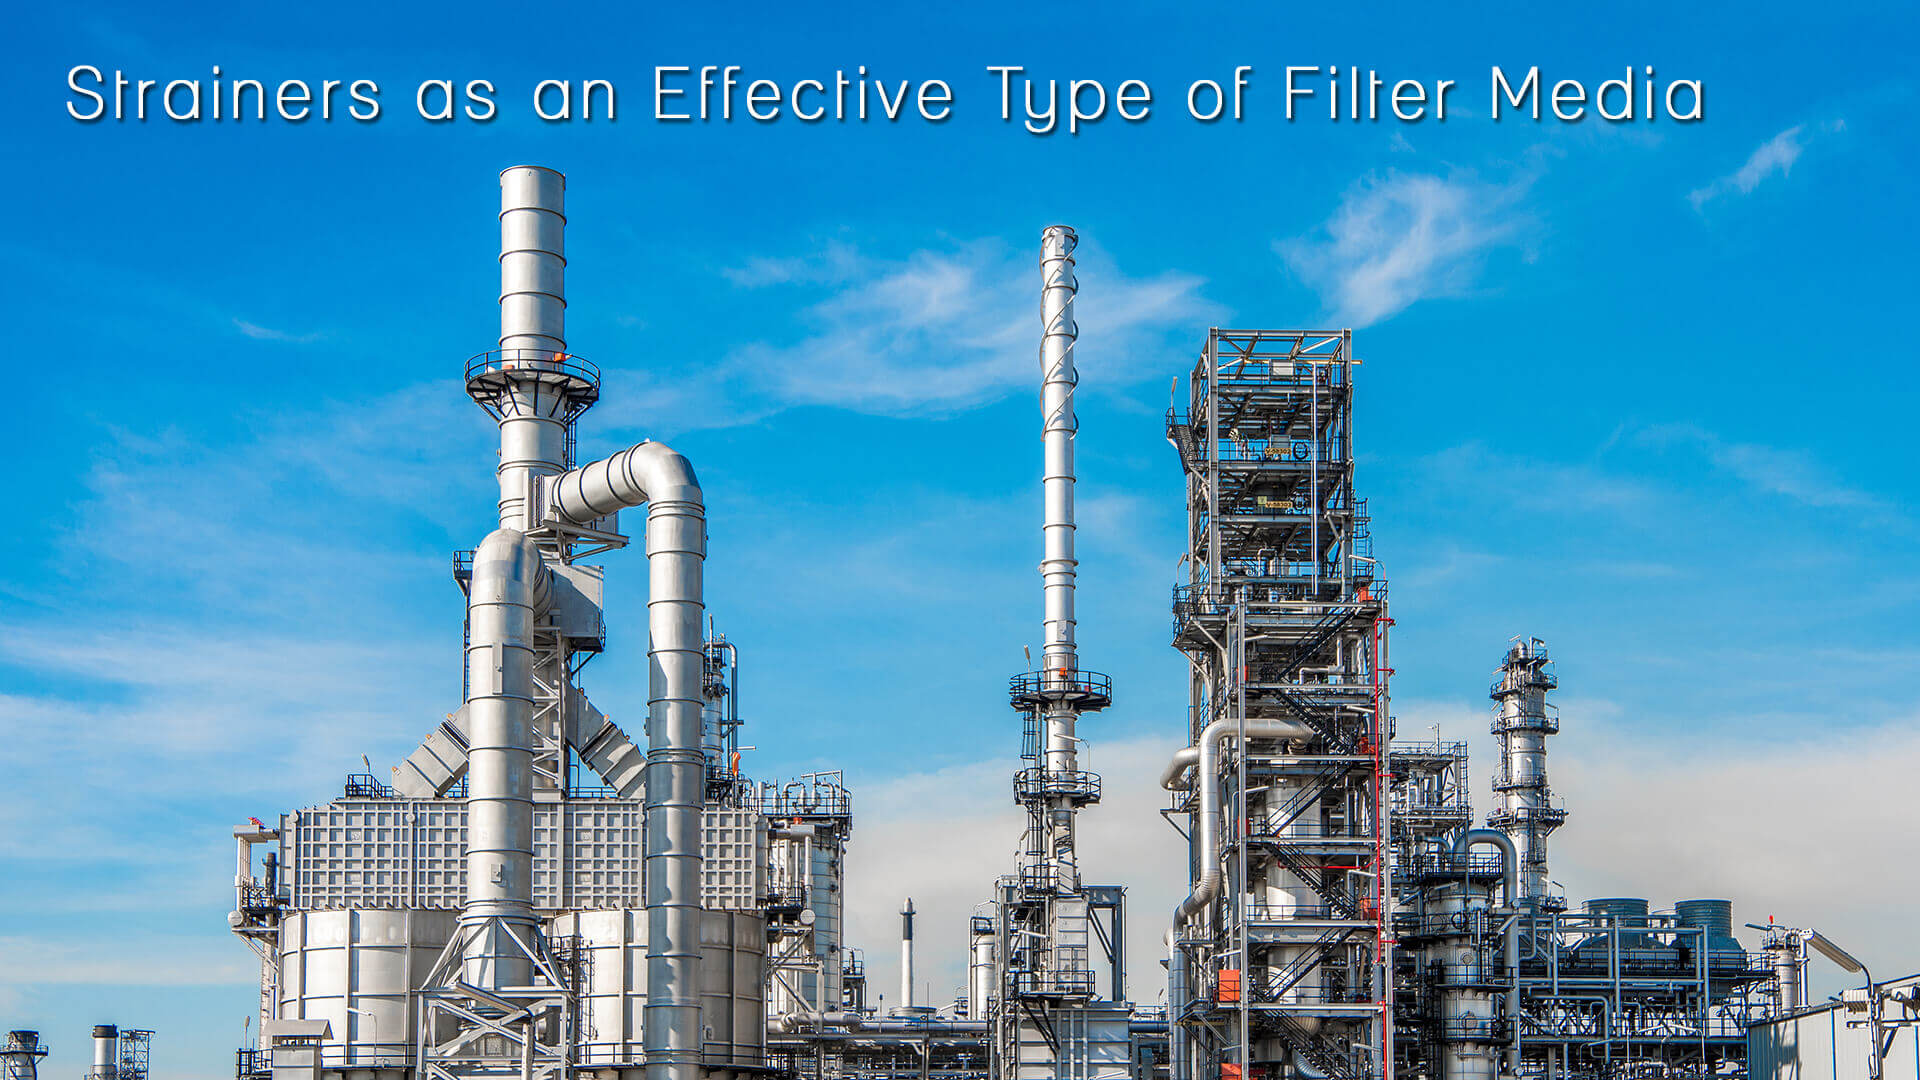 Strainers as an Effective Type of Filter Media